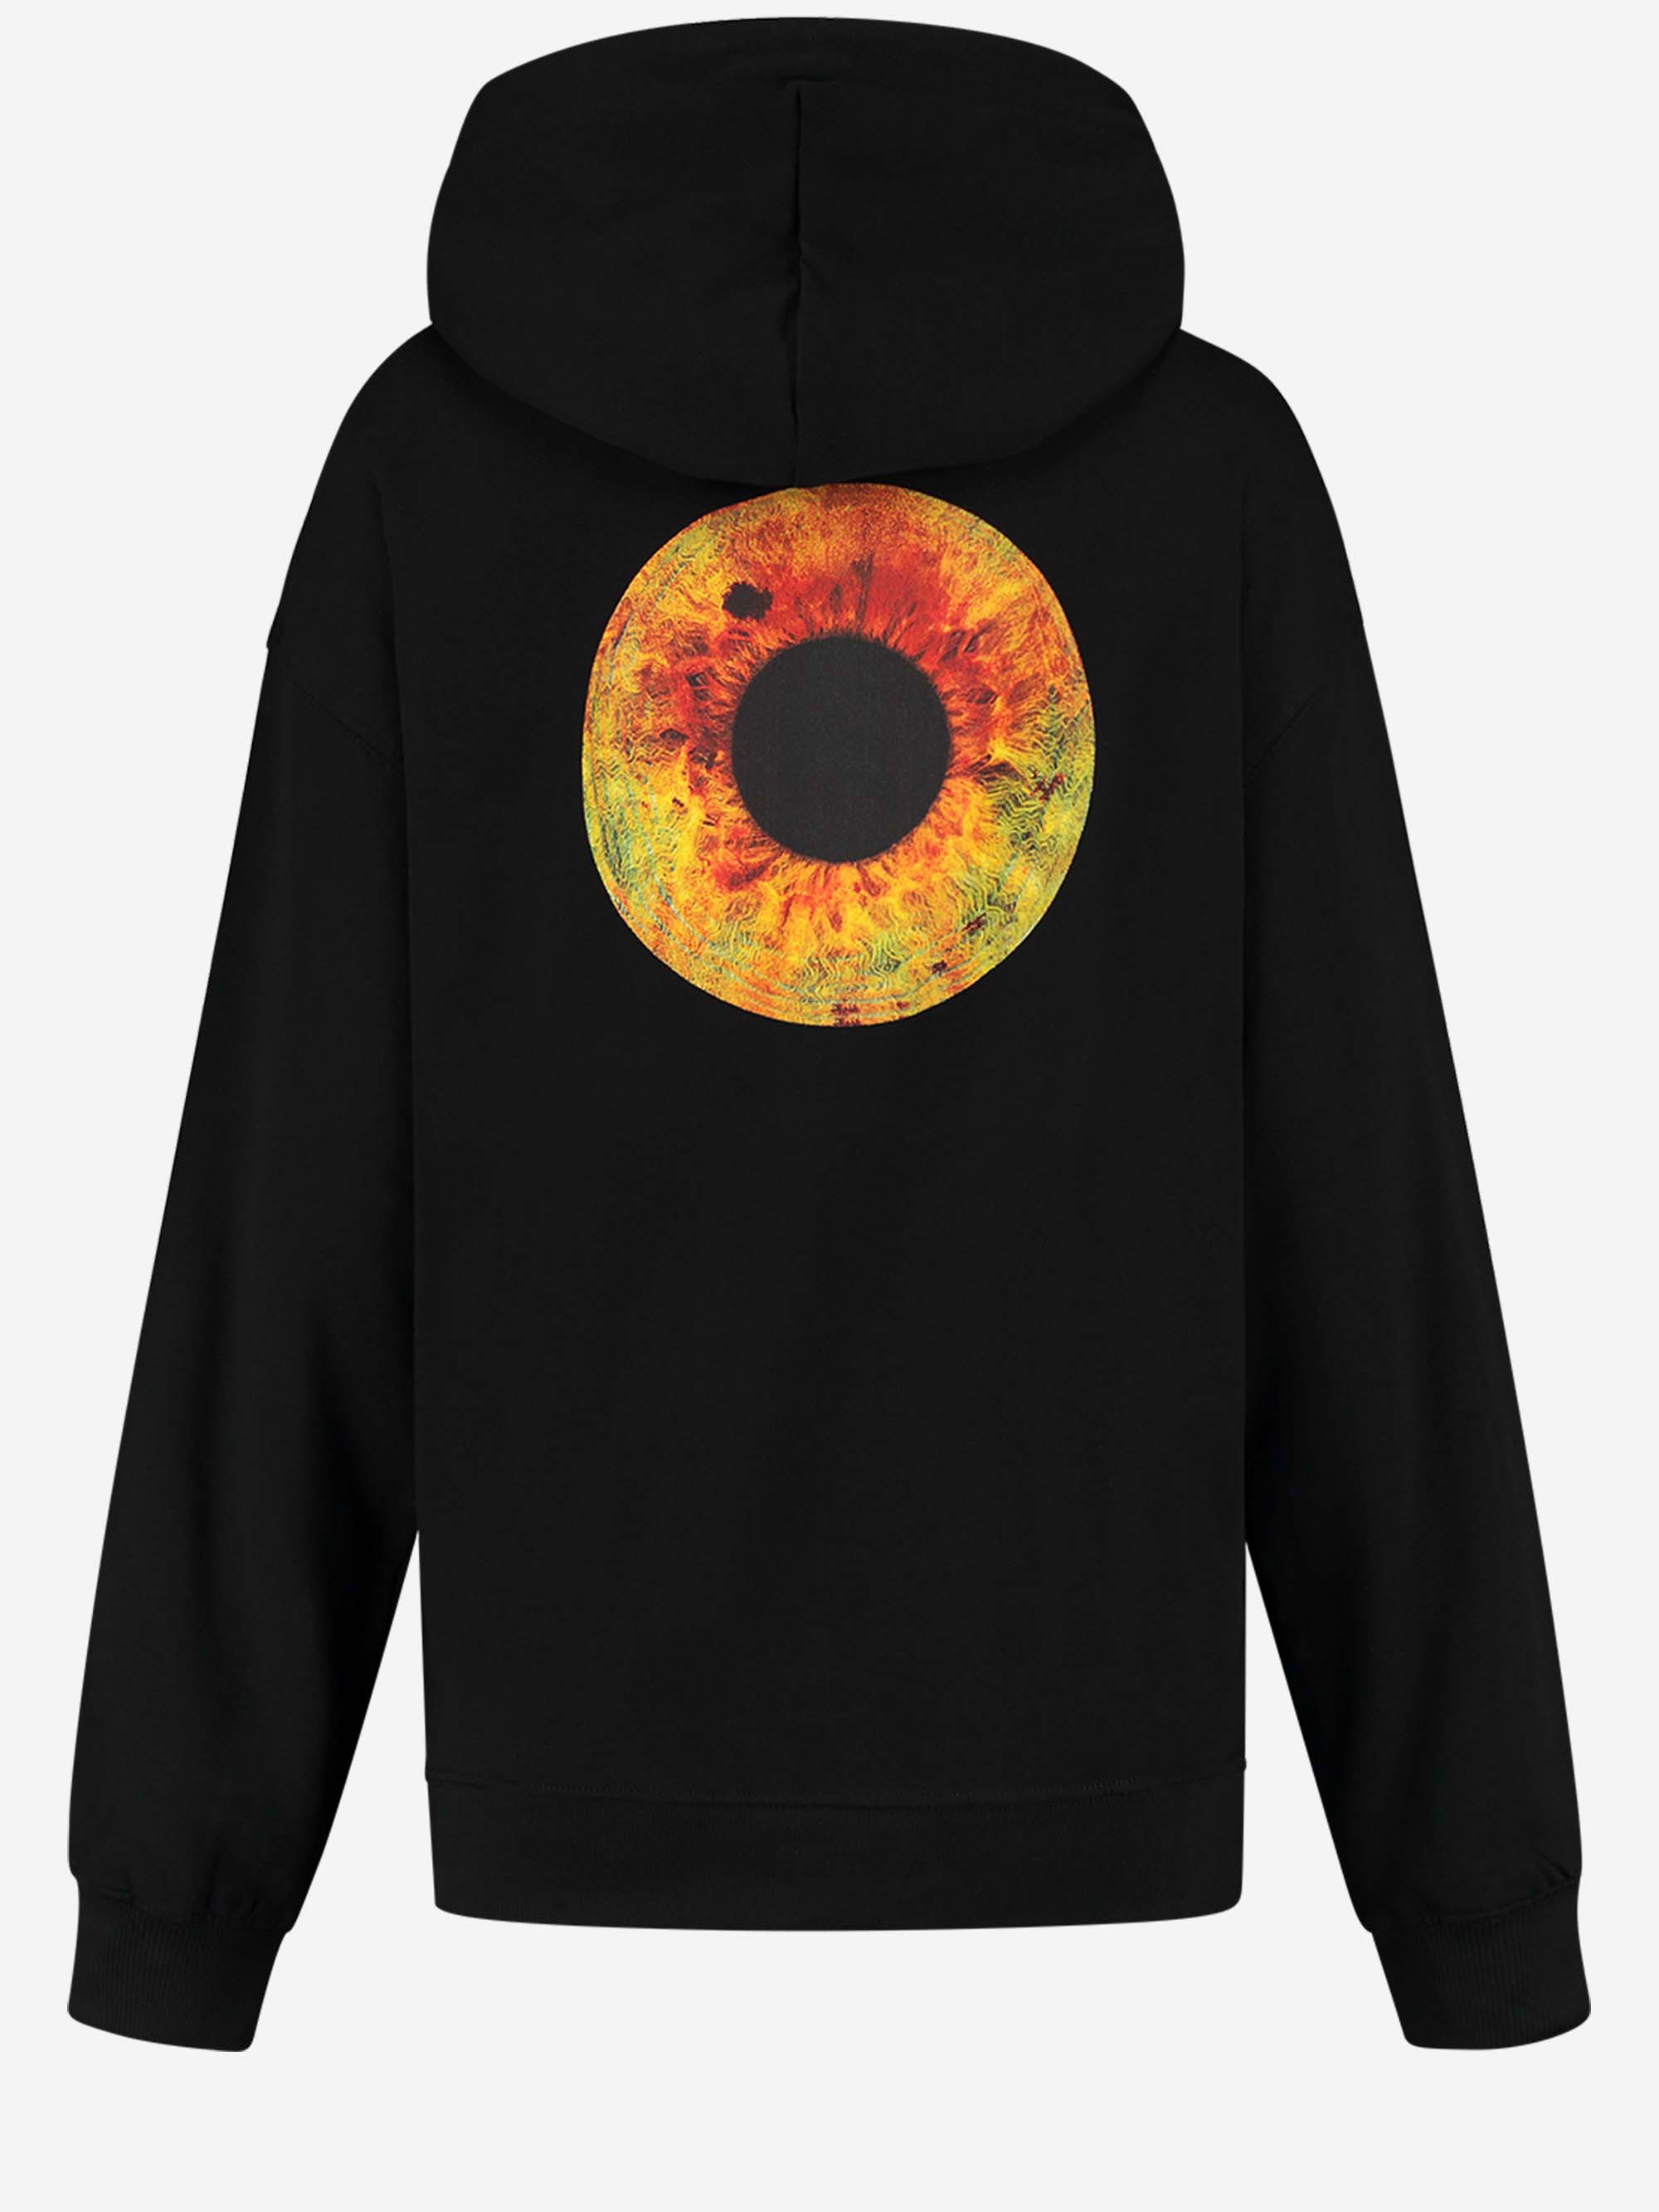 Hoodie With Bright Eye 